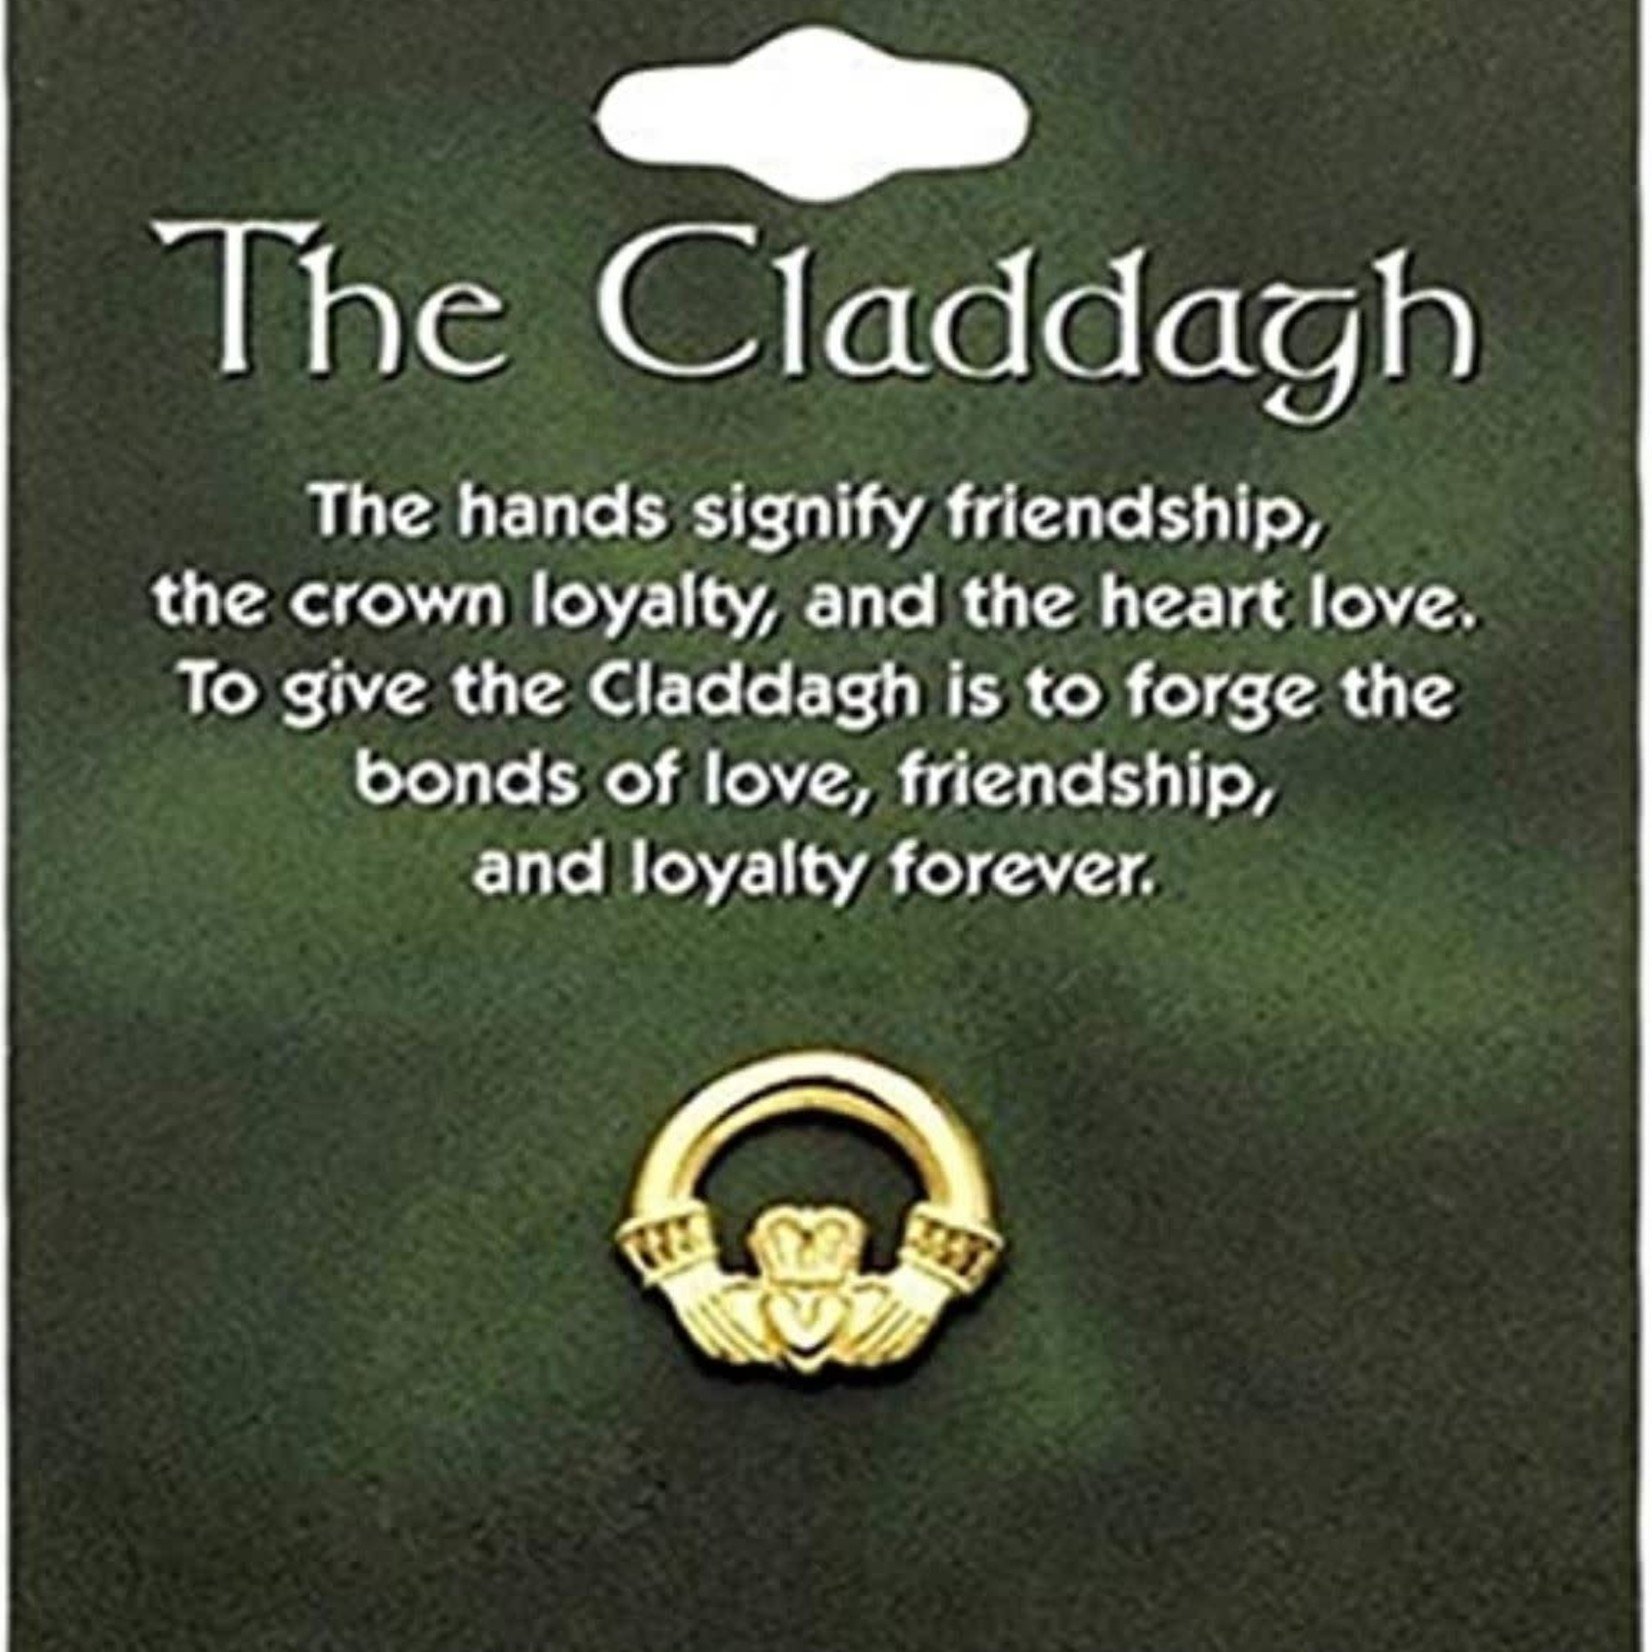 Cathedral Art Claddagh Lapel Pin (on Green Card)